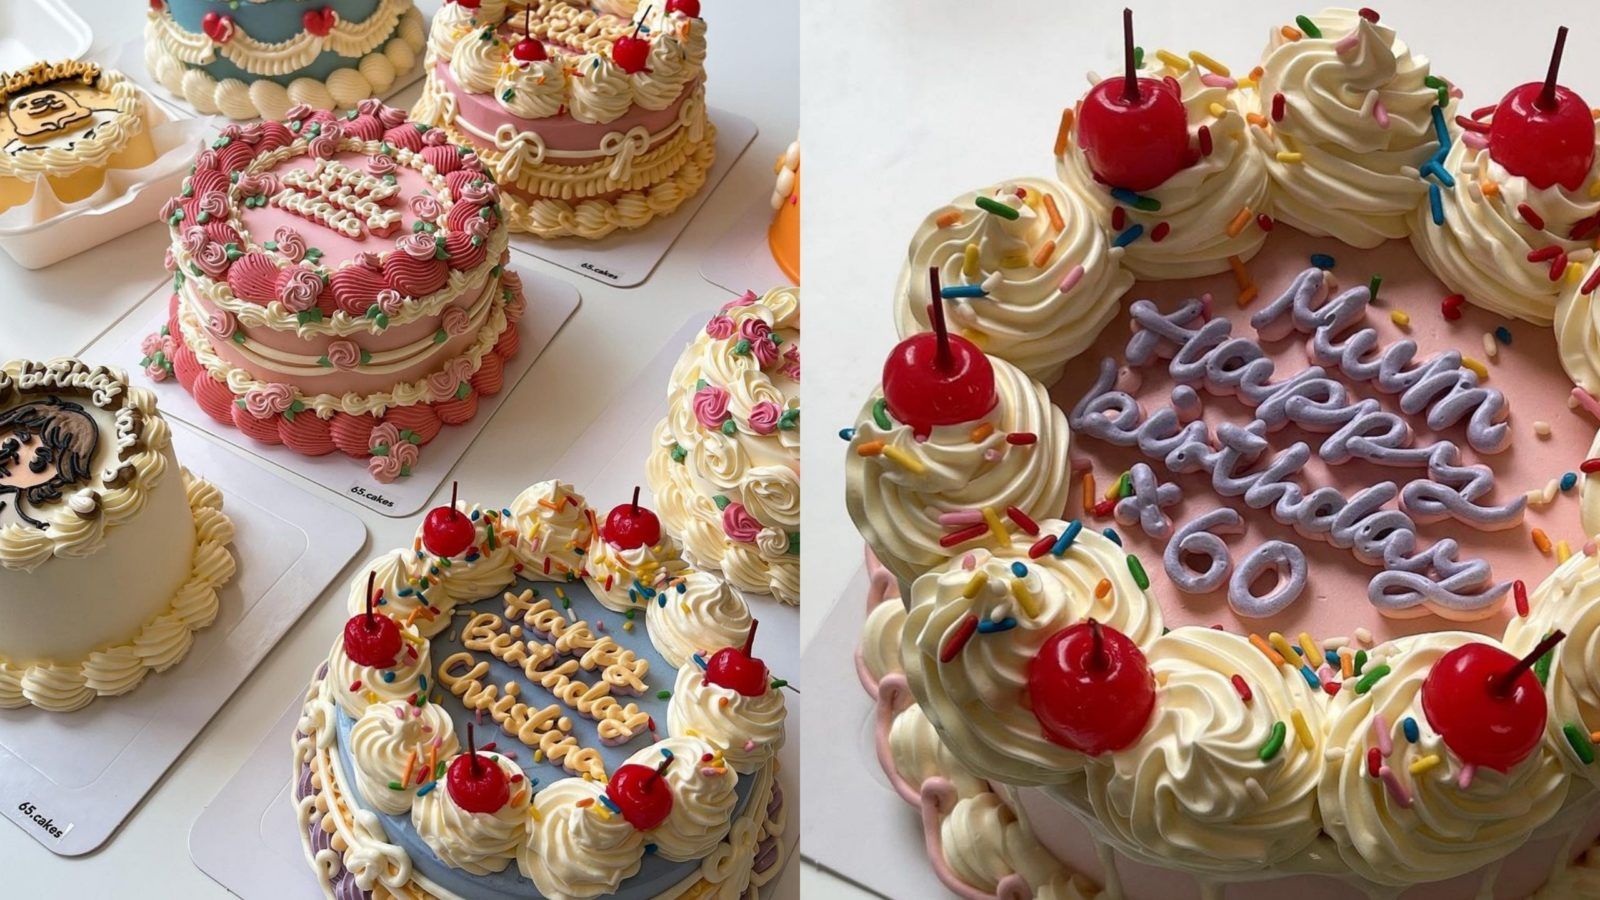 Expat Choice | 7 Cake Shops That Deliver In Hong Kong